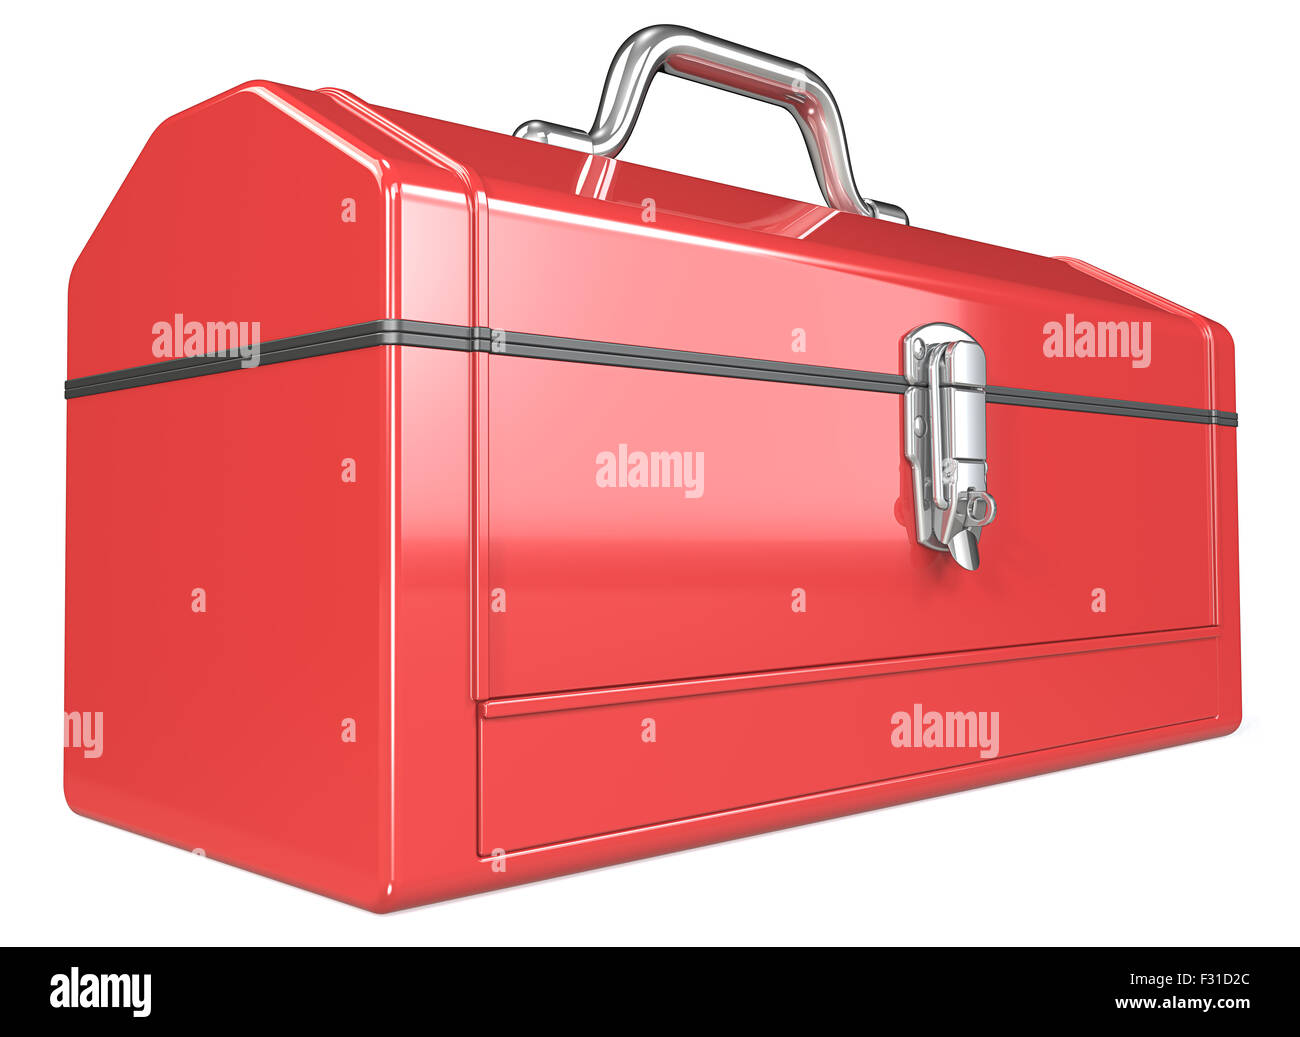 Classic red metal Toolbox. Perspective view. White background. Stock Photo